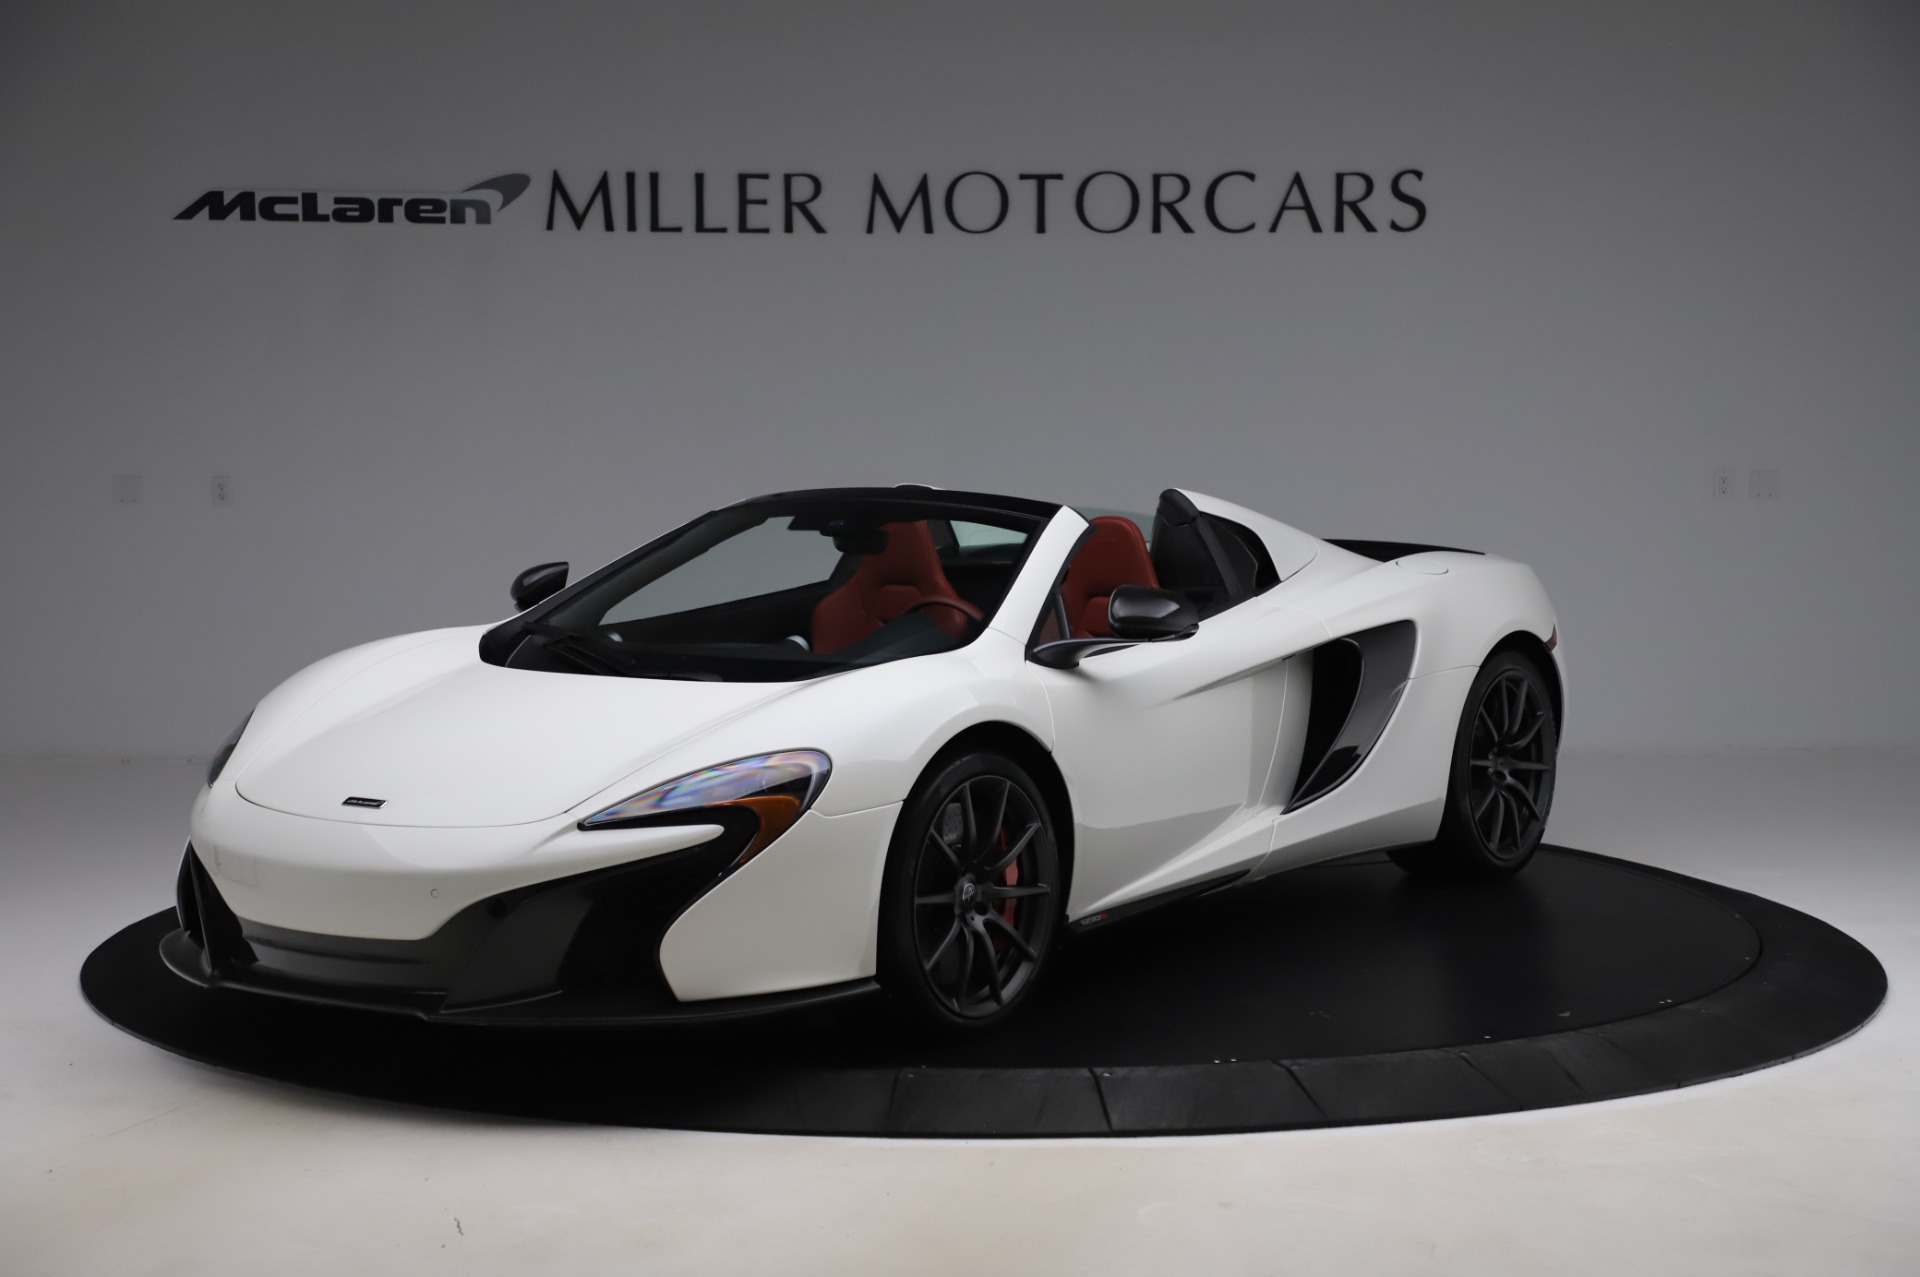 Used 2016 McLaren 650S Spider for sale Sold at Alfa Romeo of Greenwich in Greenwich CT 06830 1